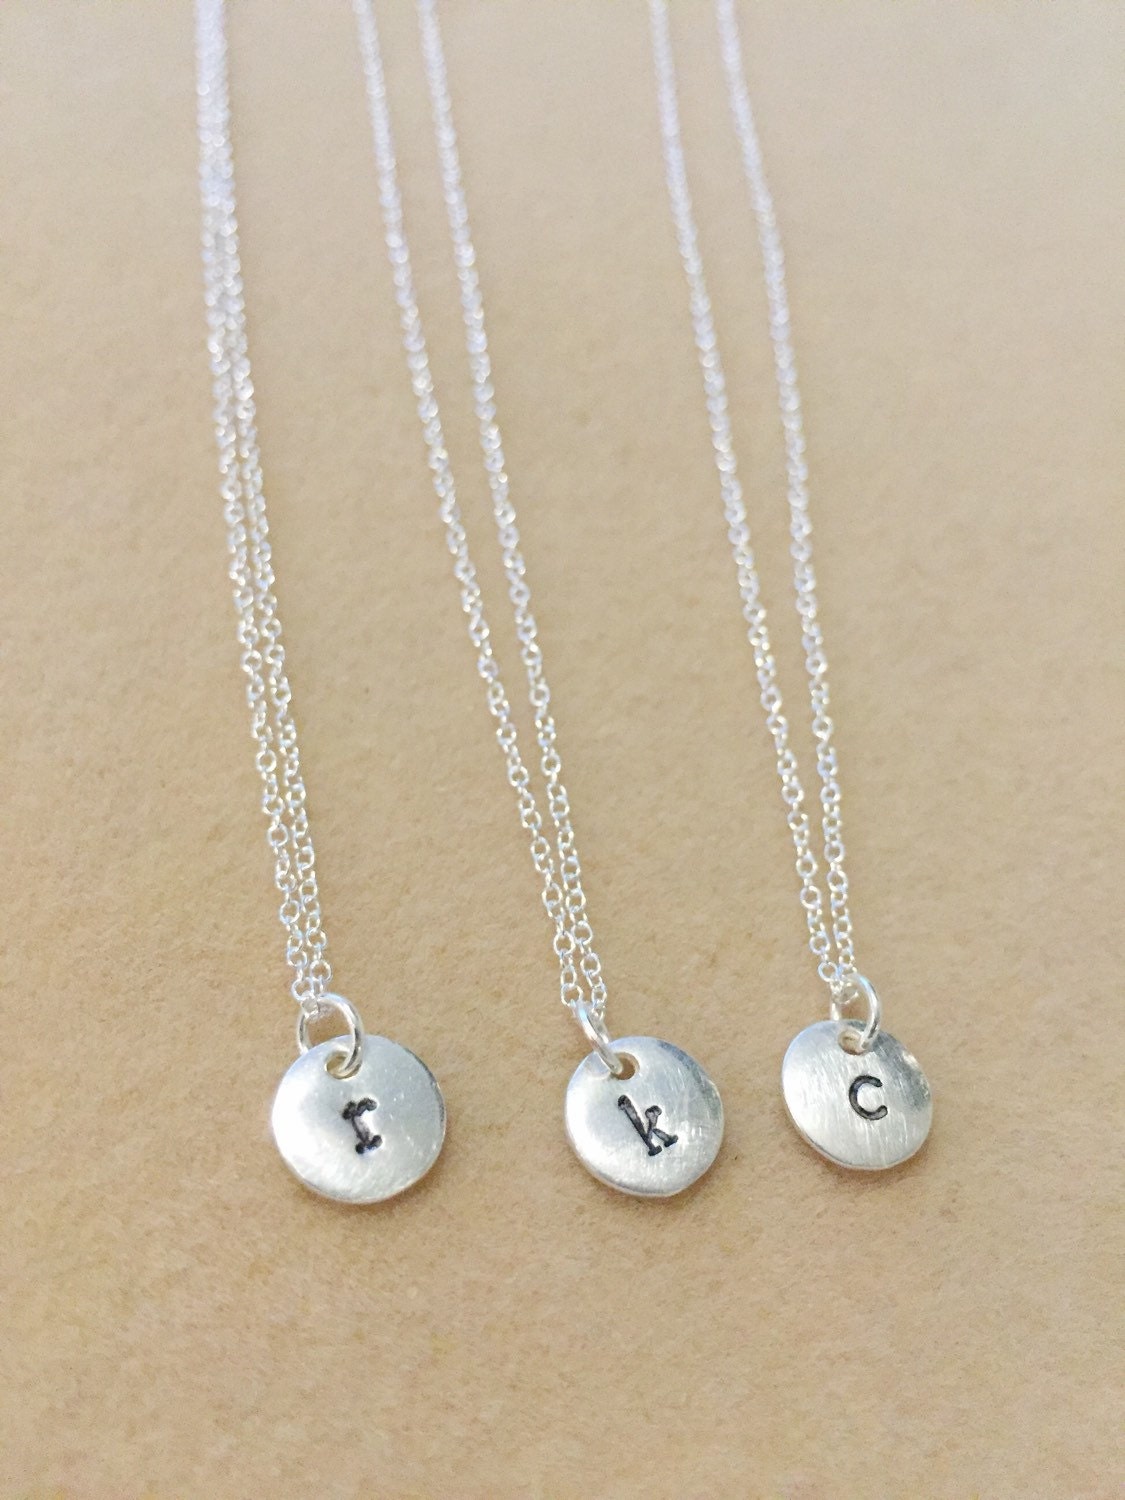 Monogram Necklace Sterling Silver Necklace Stamped Initial